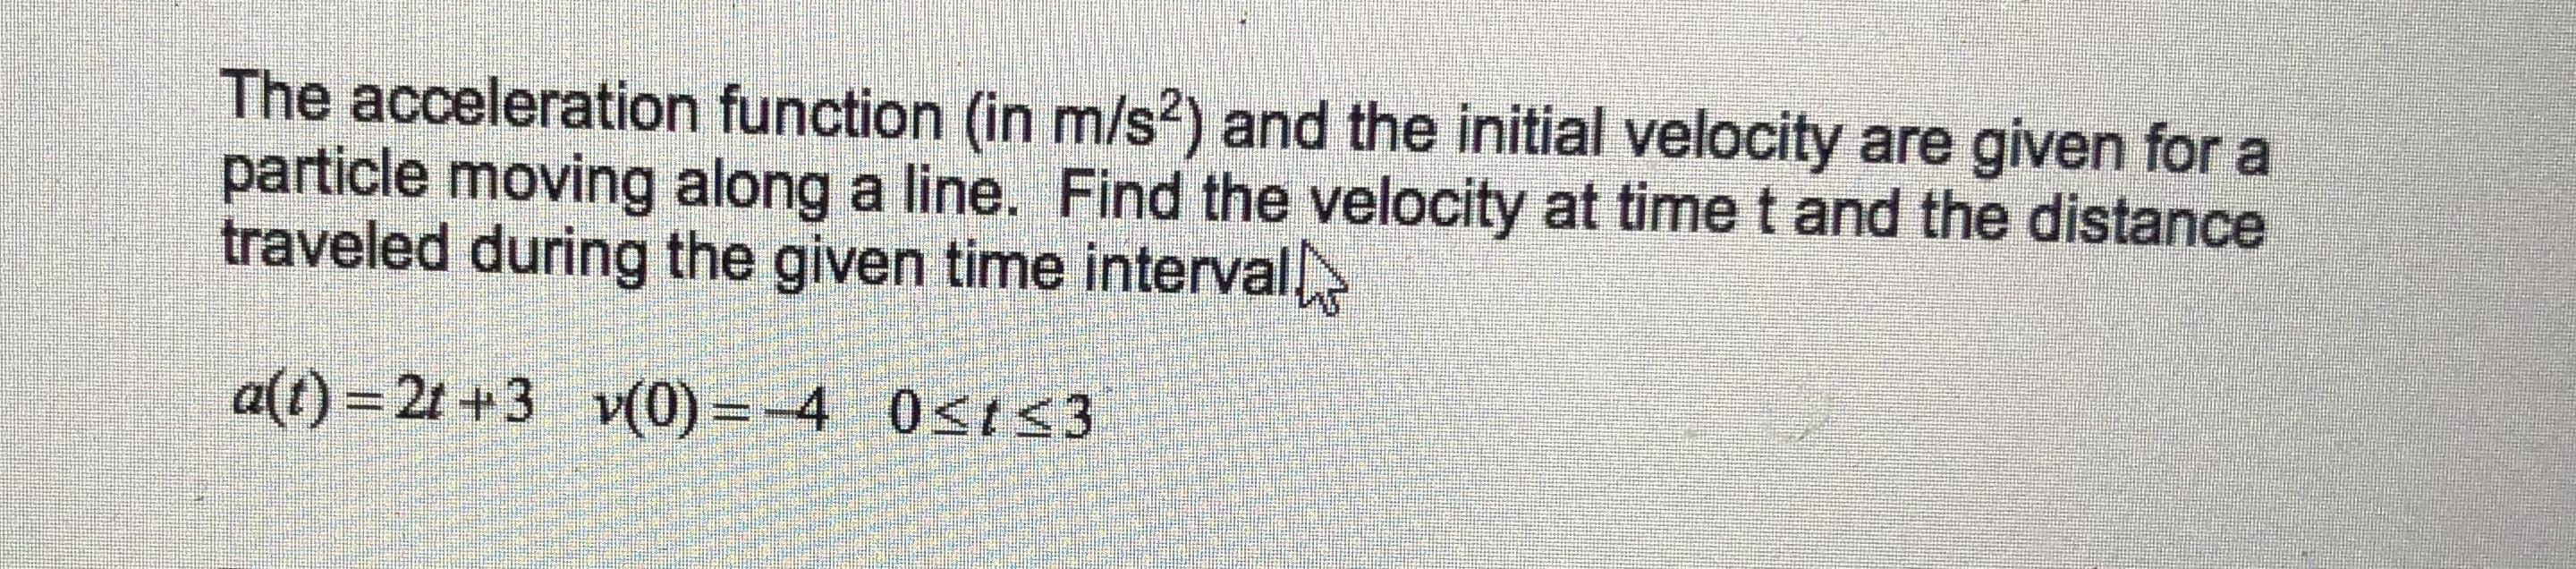 The acceleration function (in m/s?) and the initial velocity are given for a
particle moving along a line. Find the velocity at time t and the distance
traveled during the given time interval
a(t) = 2t +3 v(0) =-4 0sts3
